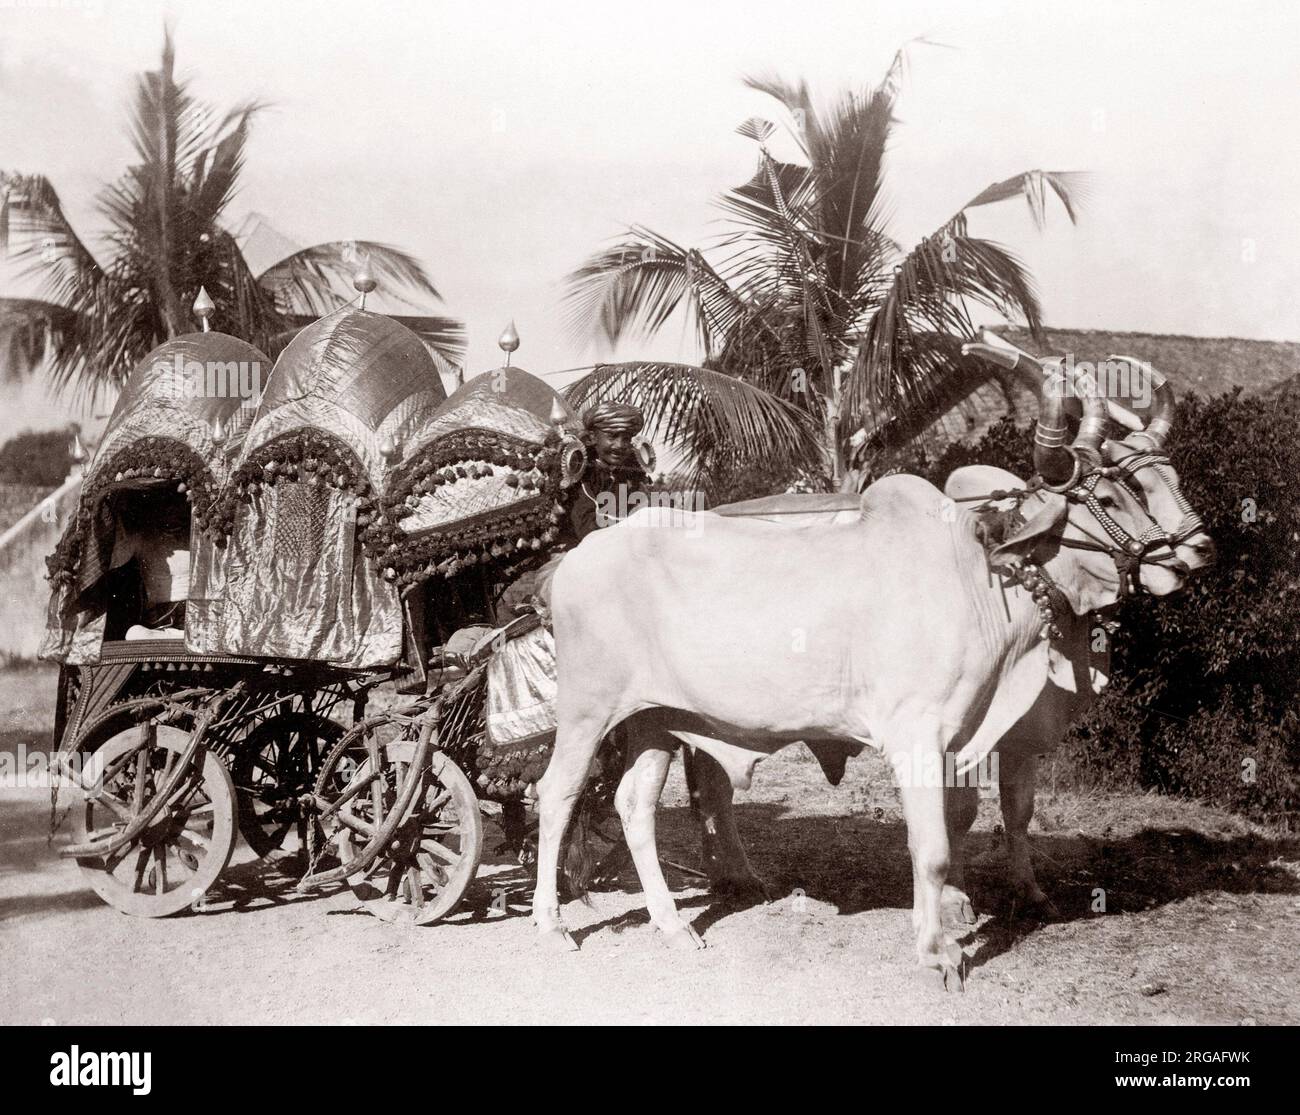 c. 1880s India - image from an album of Indian 'types' and trades' designed to illustrate India to a British viewer - cattle cart Stock Photo